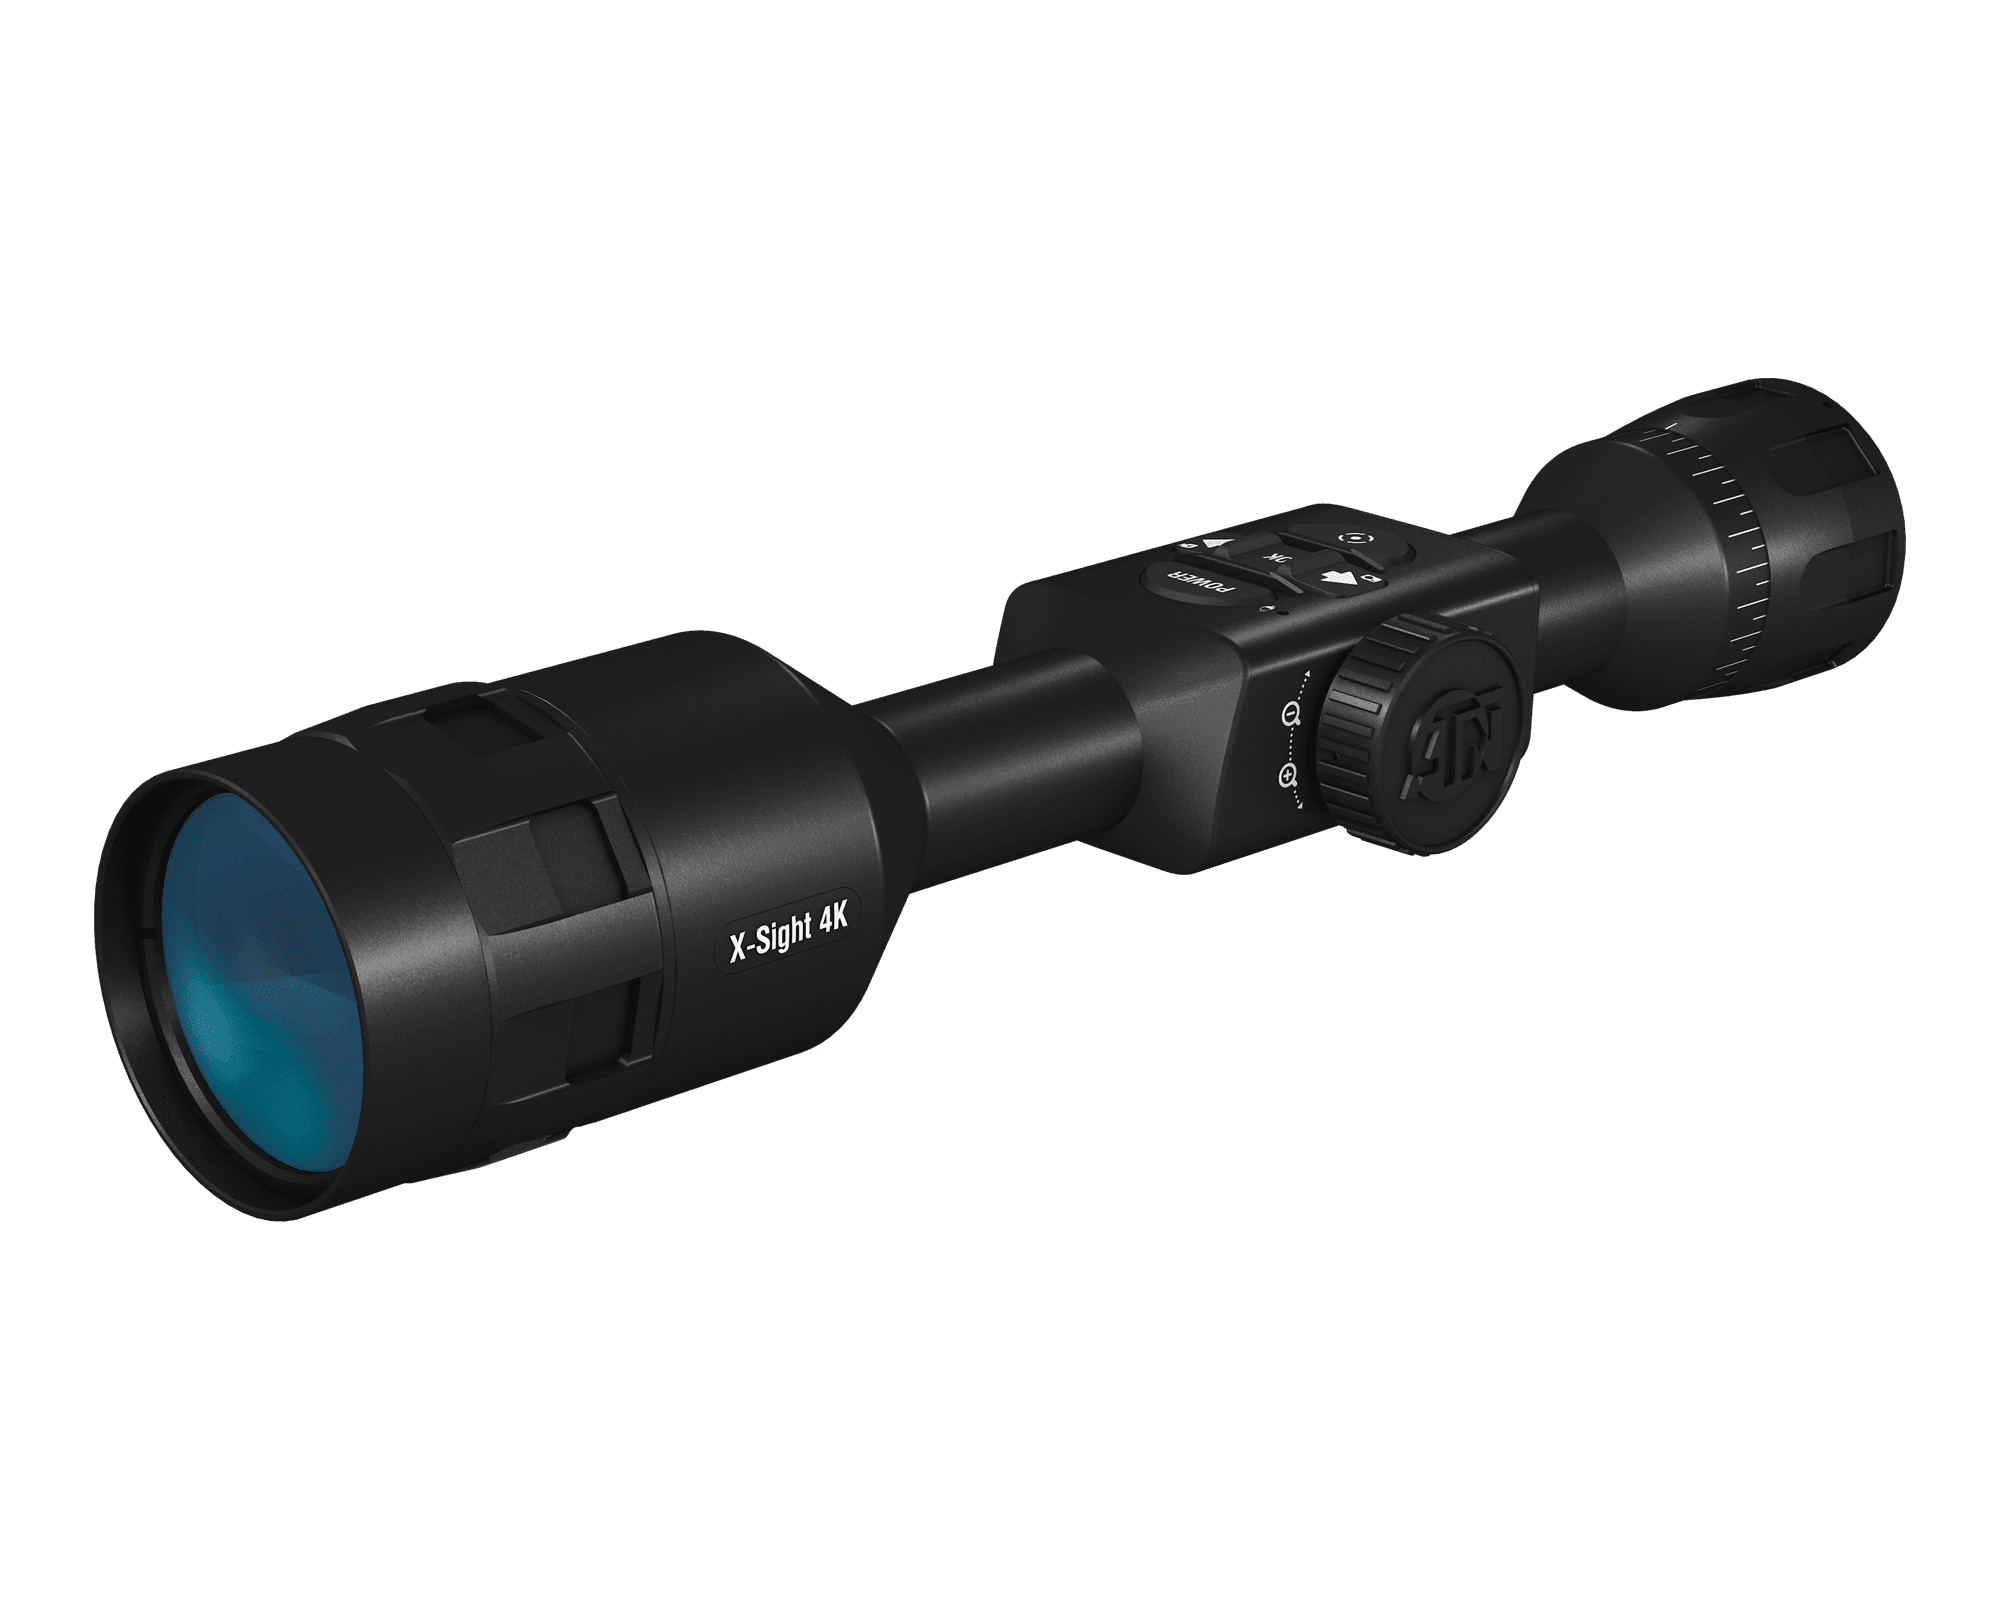 day and night vision rifle scope x sight 4k 3 14 int